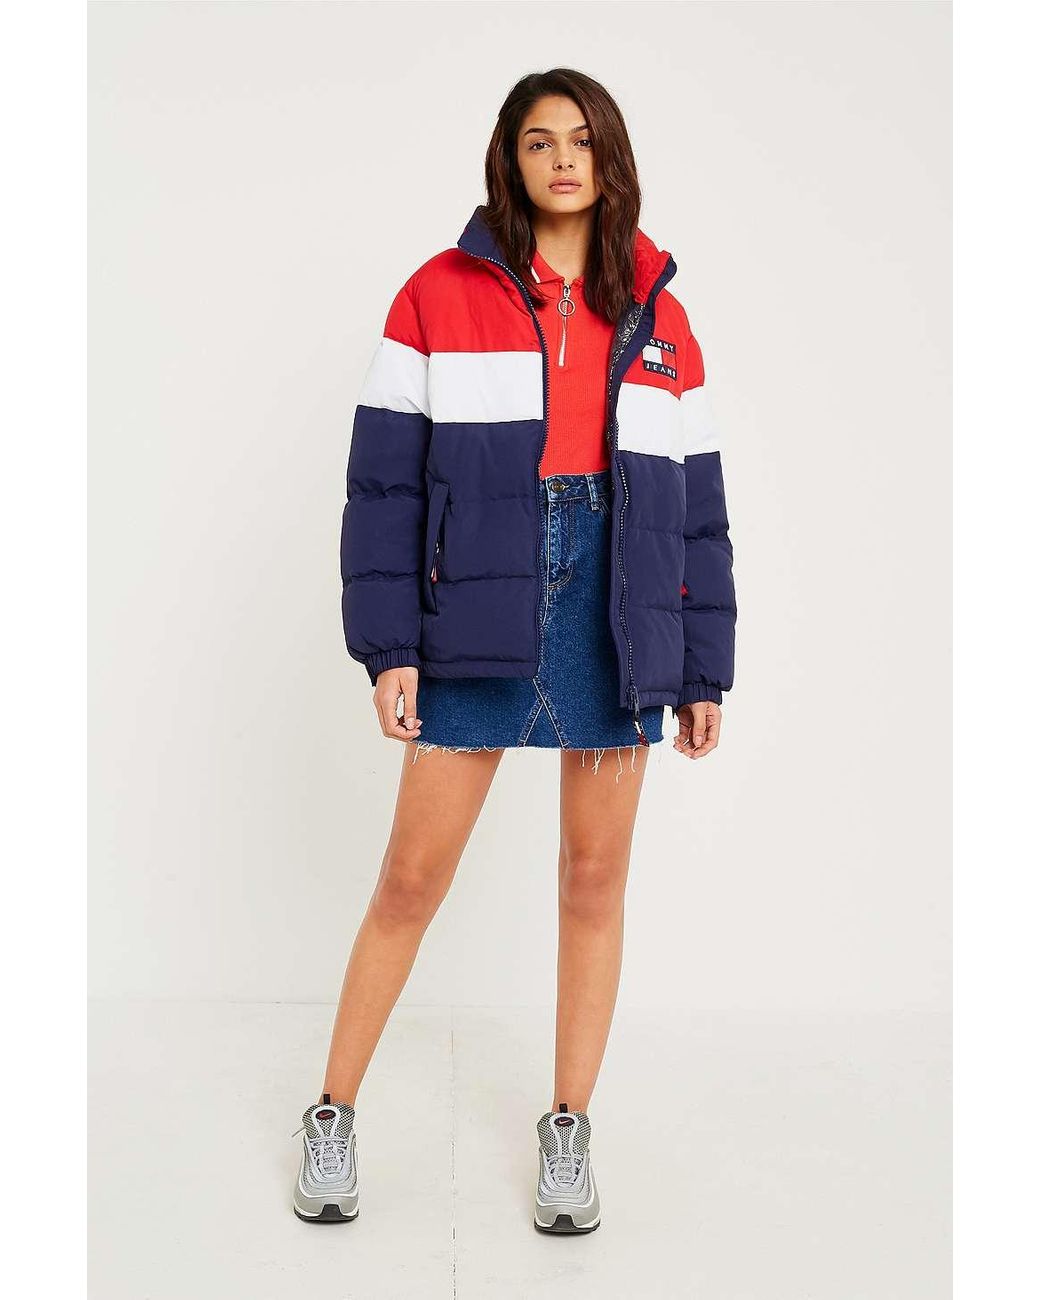 Tommy Hilfiger '90s Red White And Blue Puffer Jacket | Lyst UK